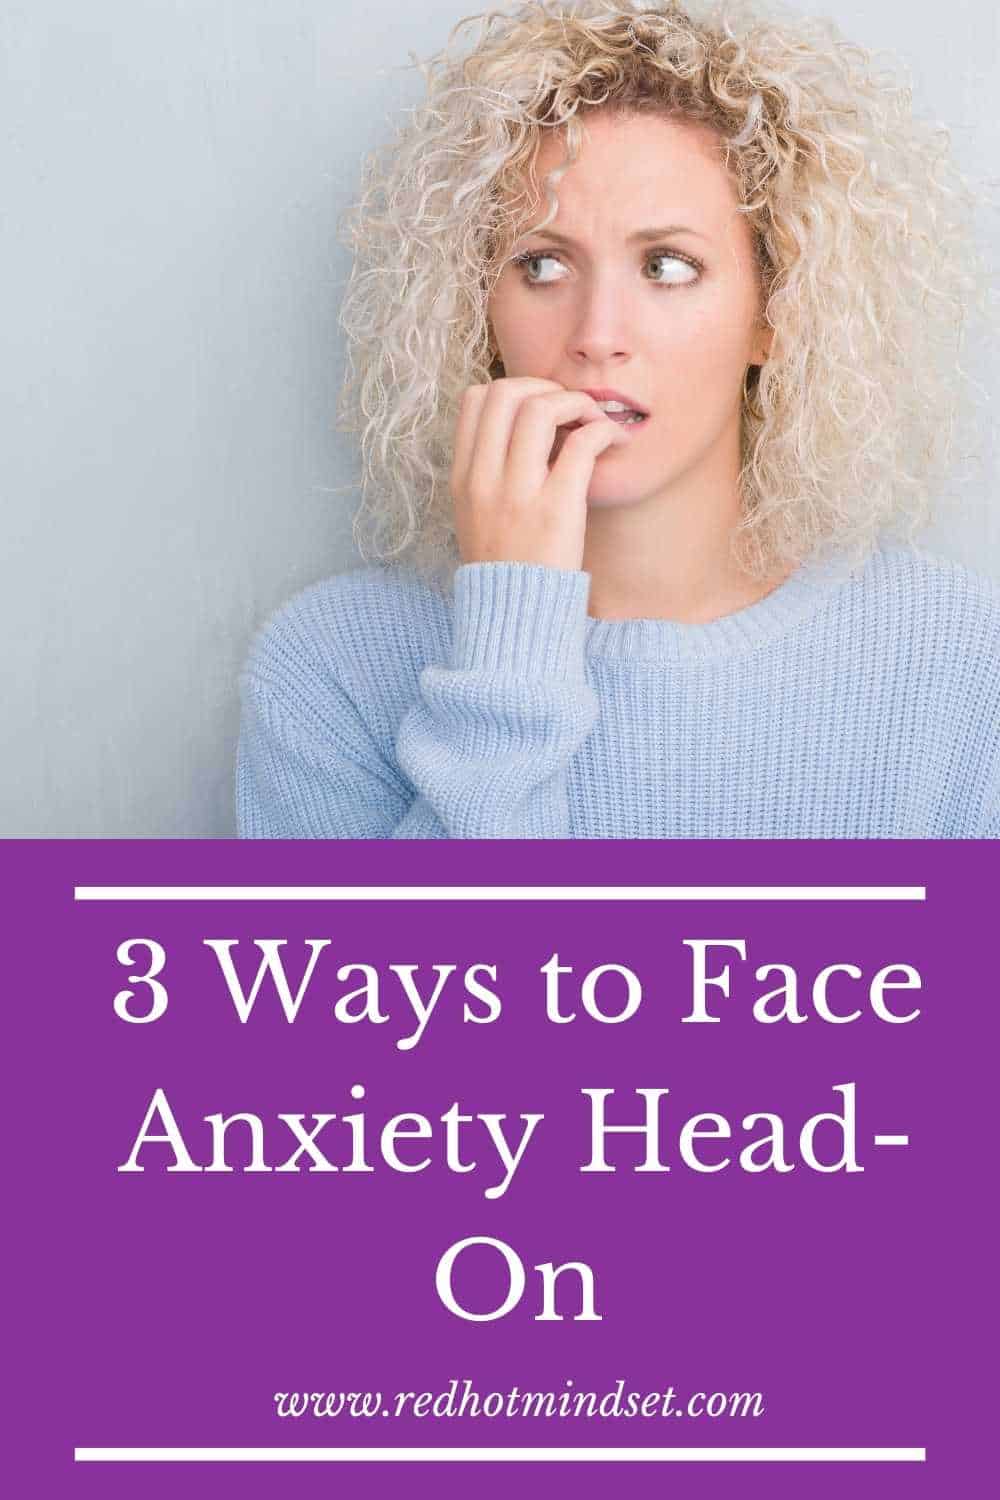 3 Ways to Face Anxiety Head-On